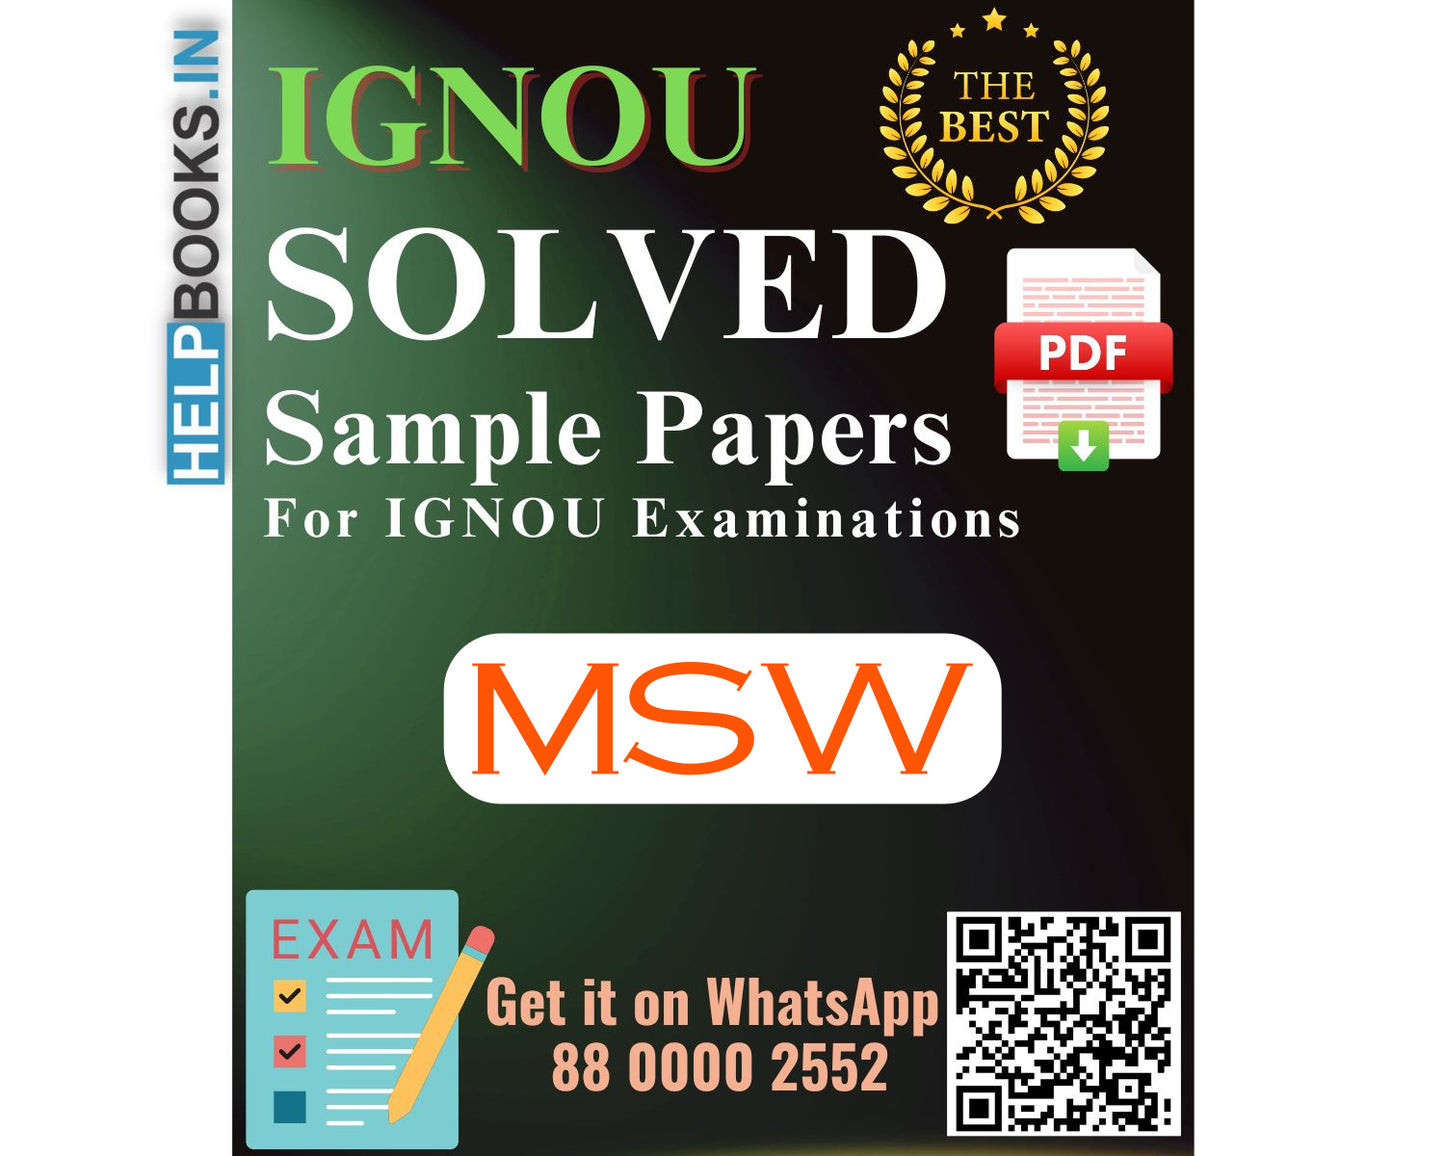 IGNOU Master of Social Work (MSW) | Solved Sample Papers for Exams